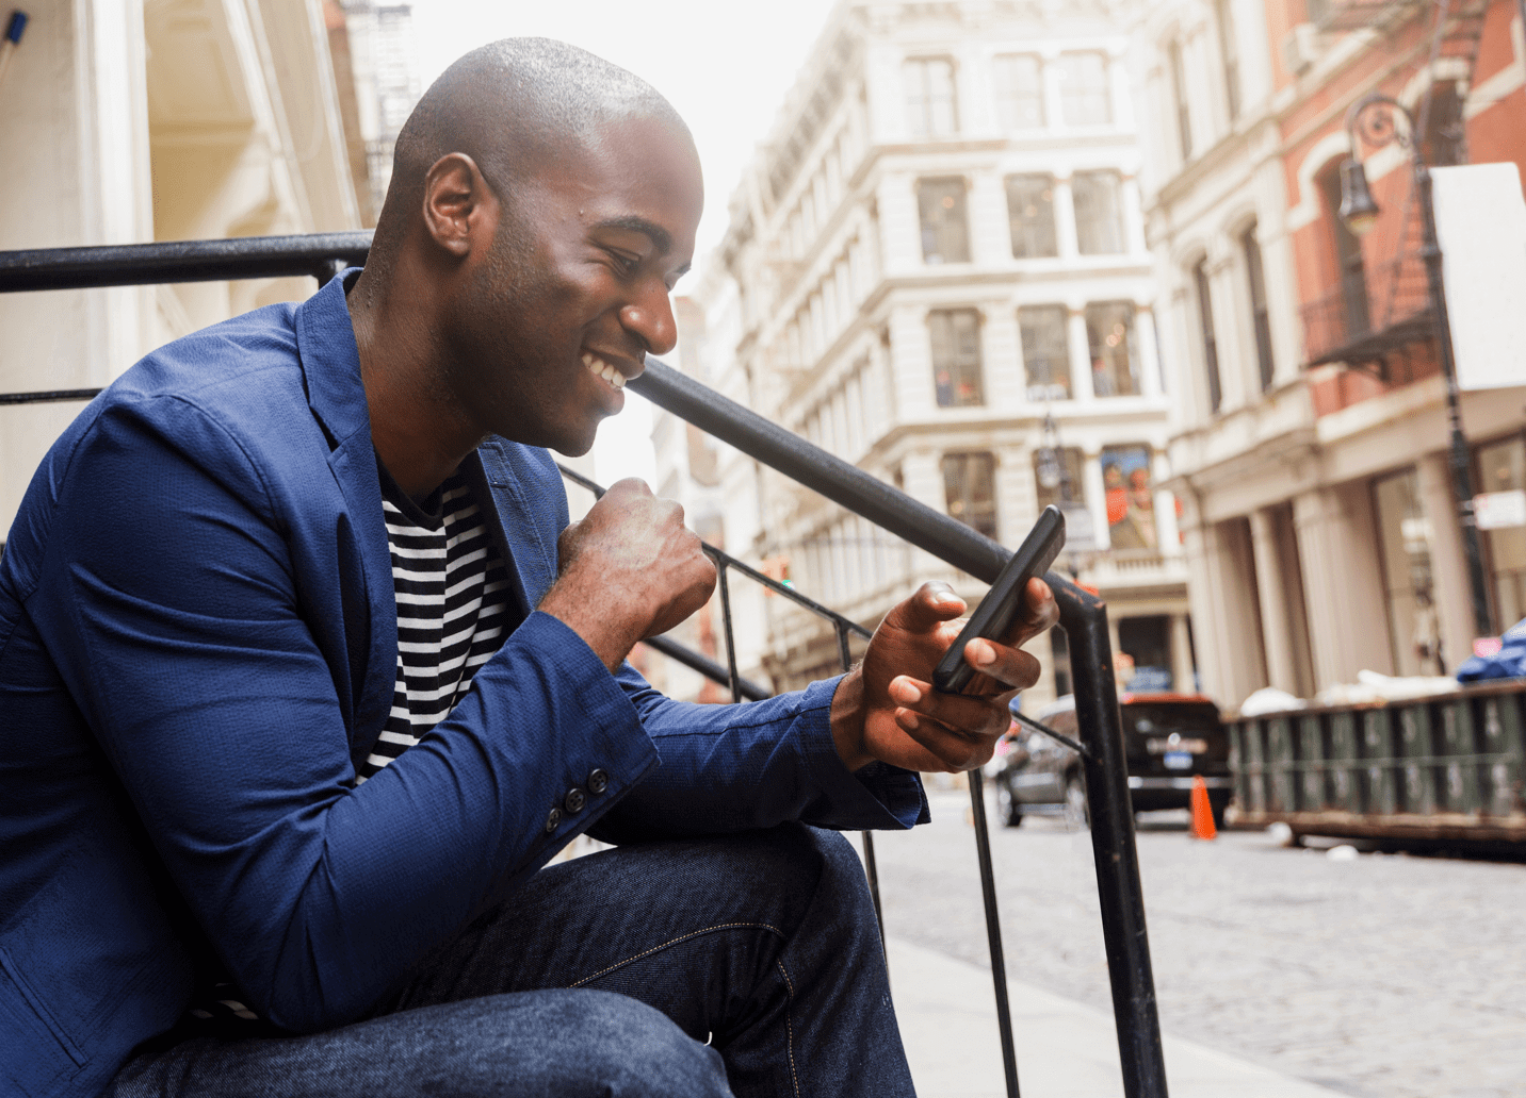 Man sitting outdoors using his phone.